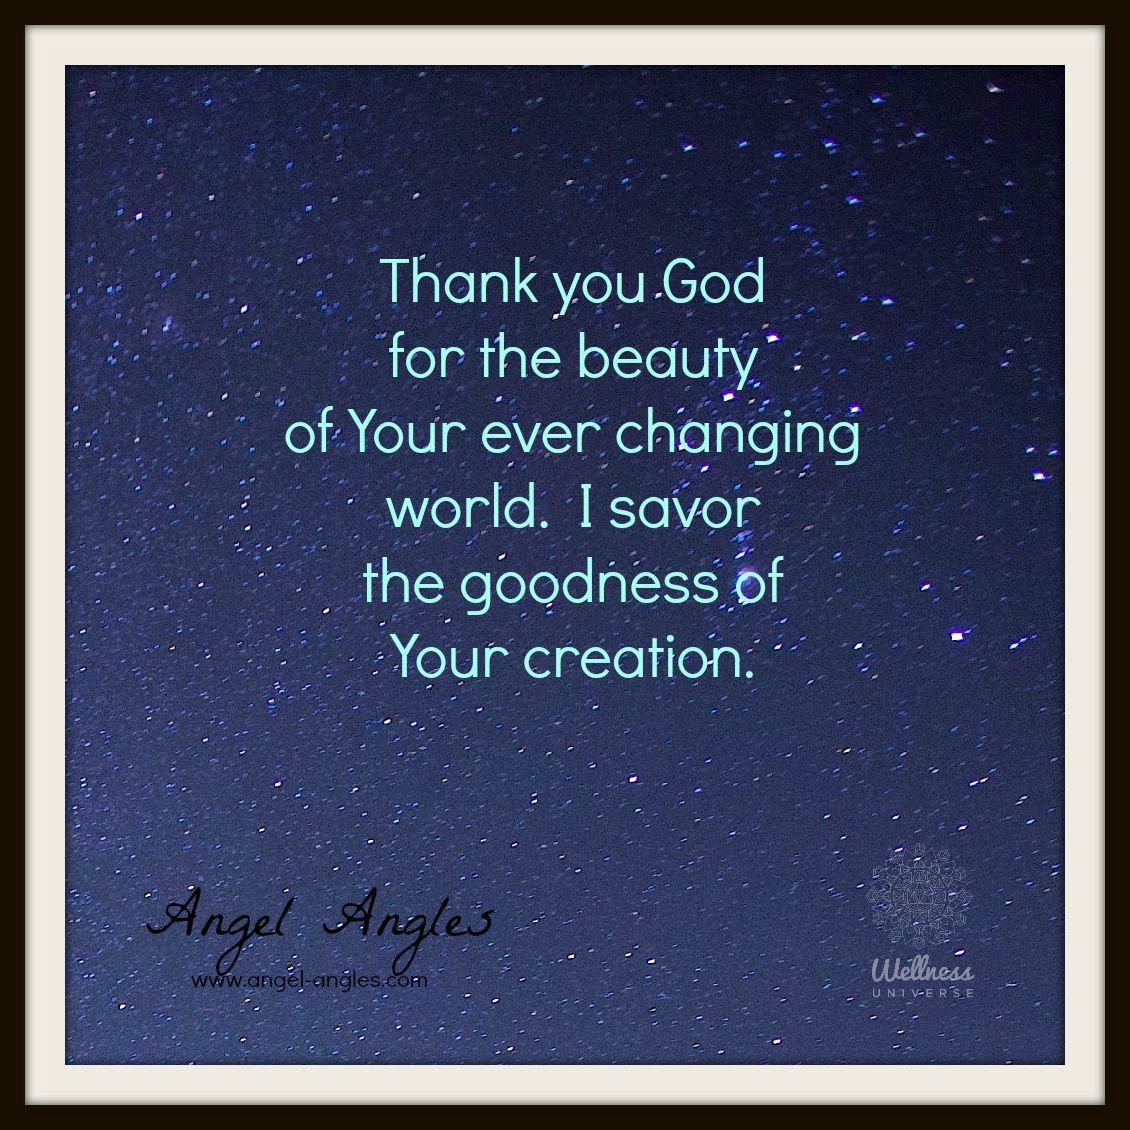 Thank you, God, for the beauty of Your ever-changing world. I savor the goodness of Your Creation. 

Look around and be amazed. 

Blessings of love, joy, and peace.
Love,
Janette 
.
.
#WUVIP #WUWorldChanger #Gratitude #BeautyofCreation